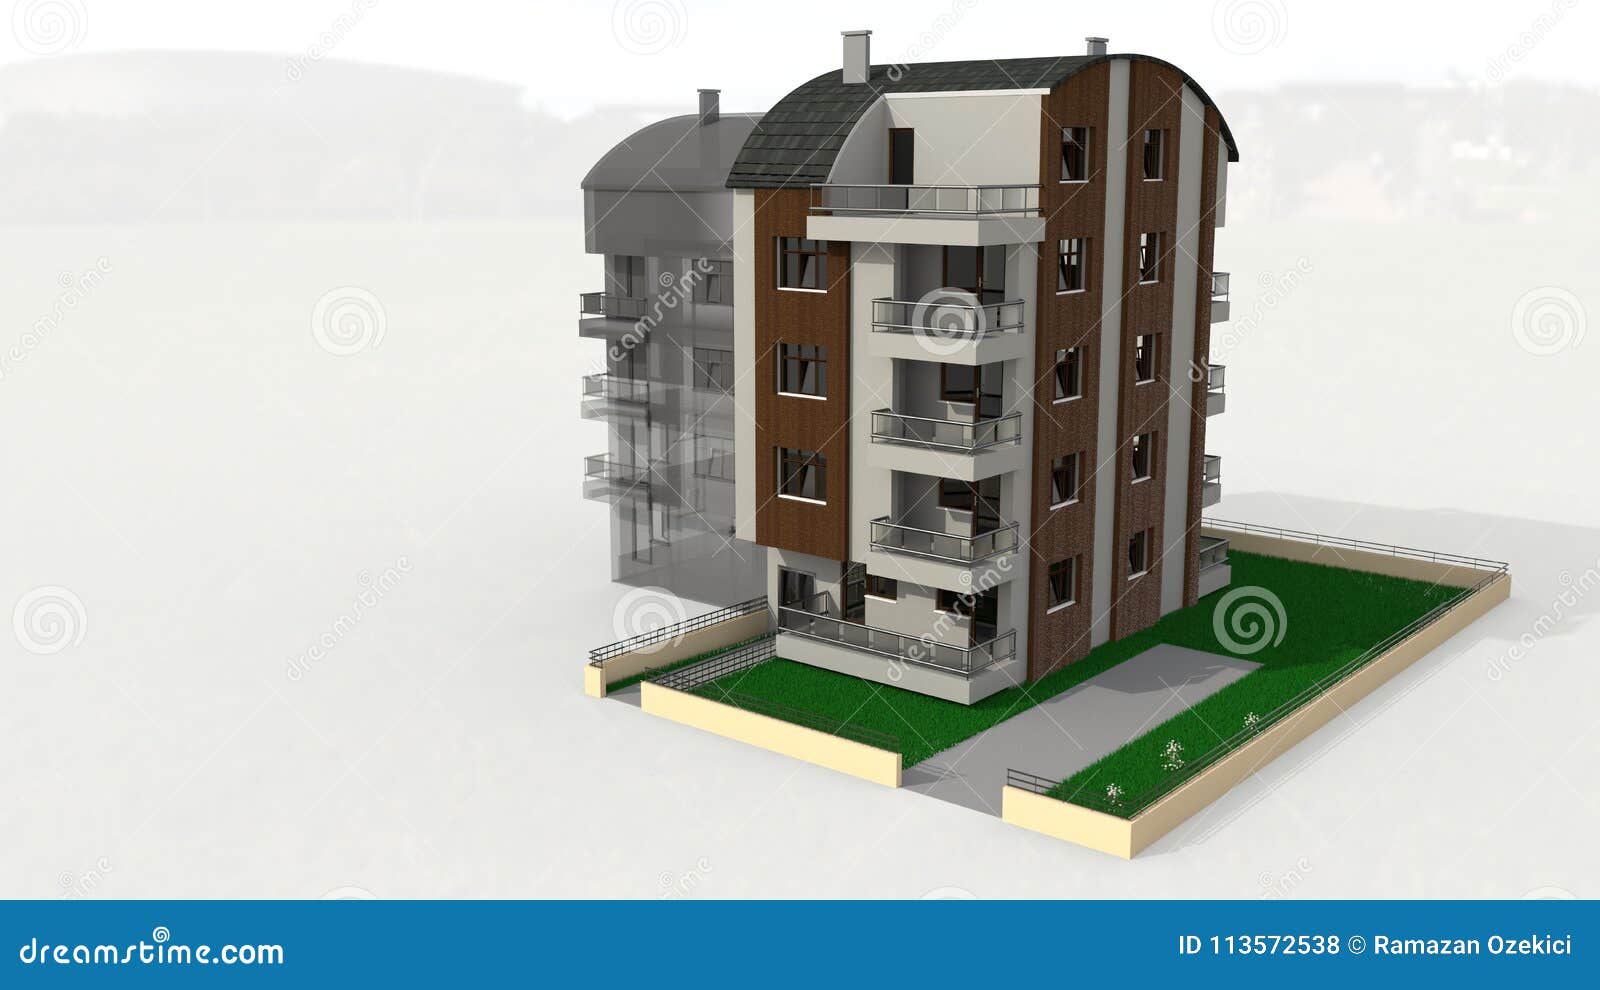 tonos five-story roofed architectural work, 3d rendering